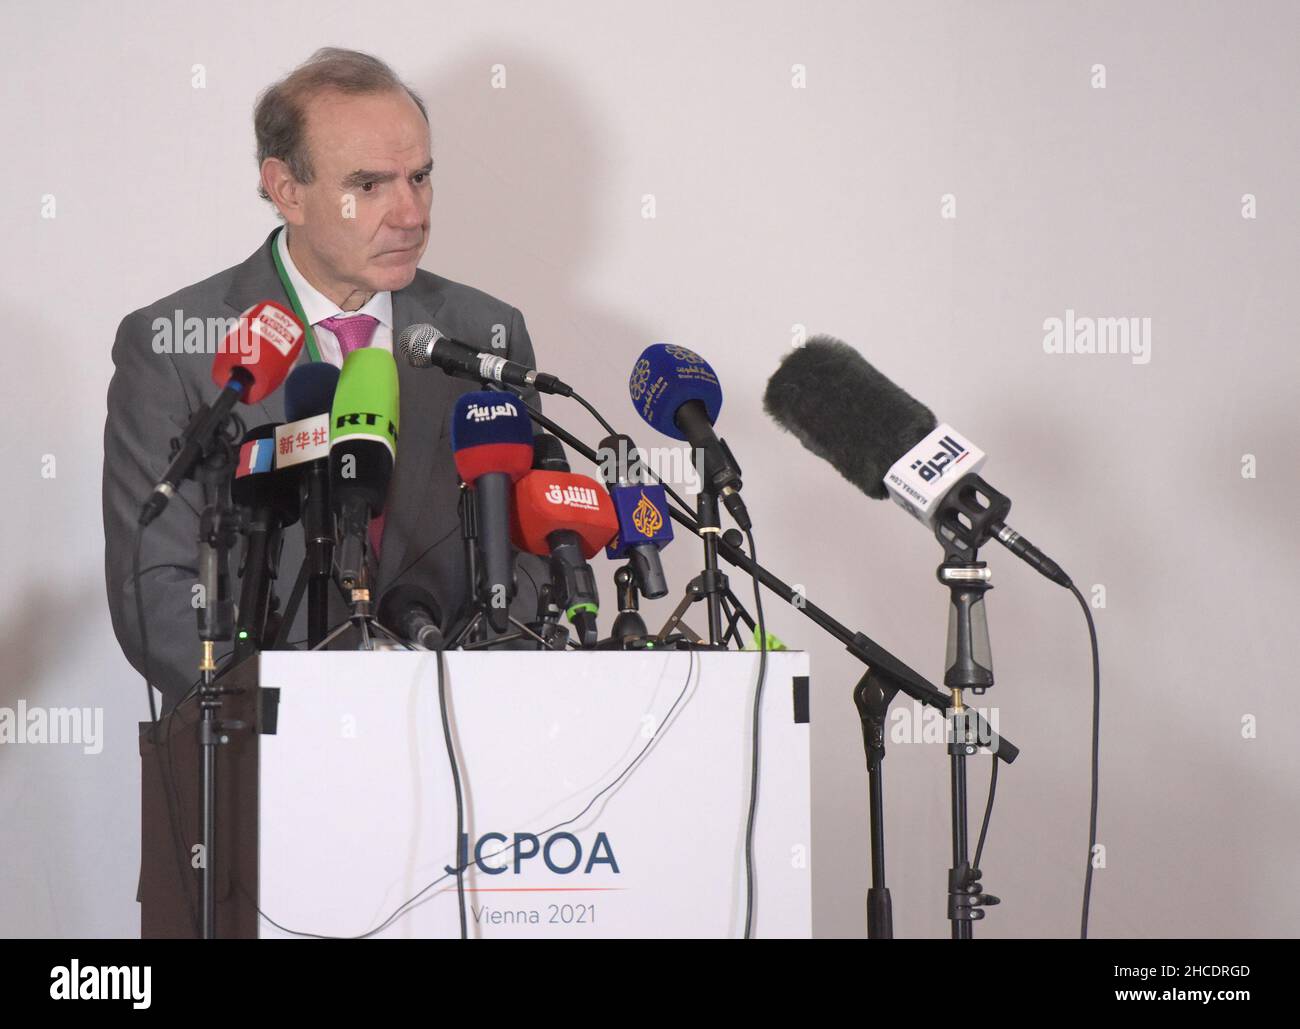 Vienna, Austria. 27th Dec, 2021. Enrique Mora, deputy secretary general of the European External Action Service, speaks to reporters after a meeting of the Joint Comprehensive Plan of Action (JCPOA) Joint Commission in Vienna, Austria, on Dec. 27, 2021. Credit: Guo Chen/Xinhua/Alamy Live News Stock Photo